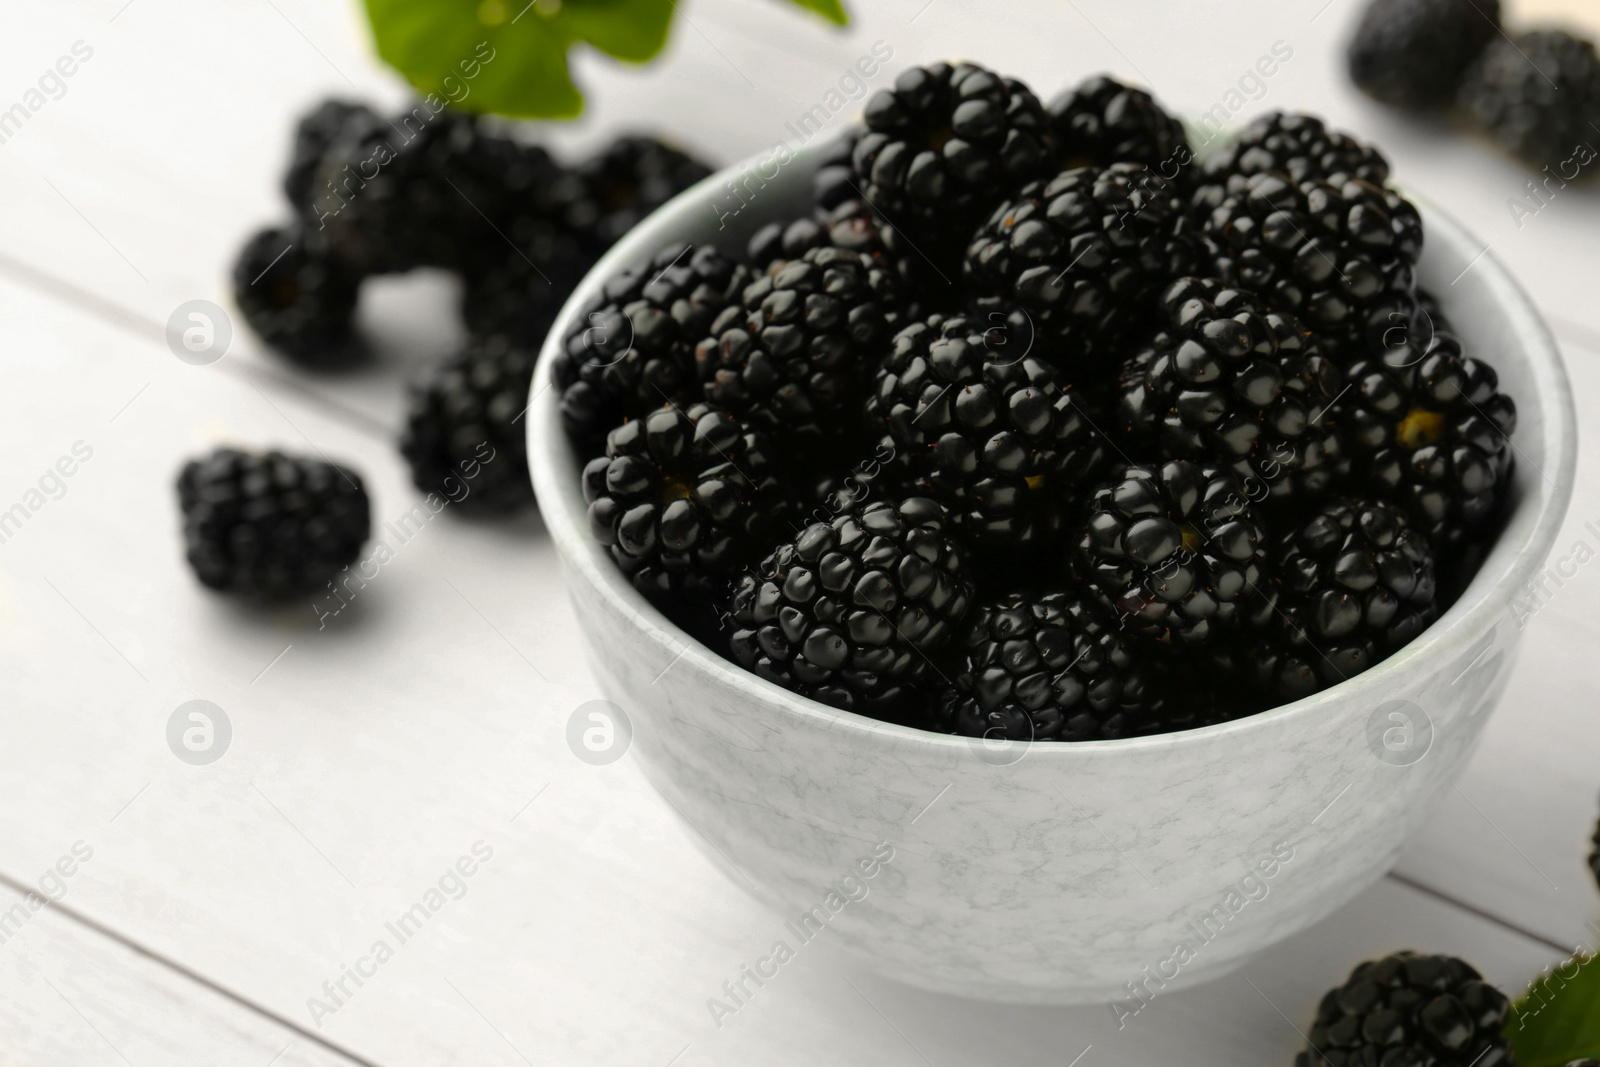 Photo of Bowl with fresh ripe blackberries on white wooden table, closeup